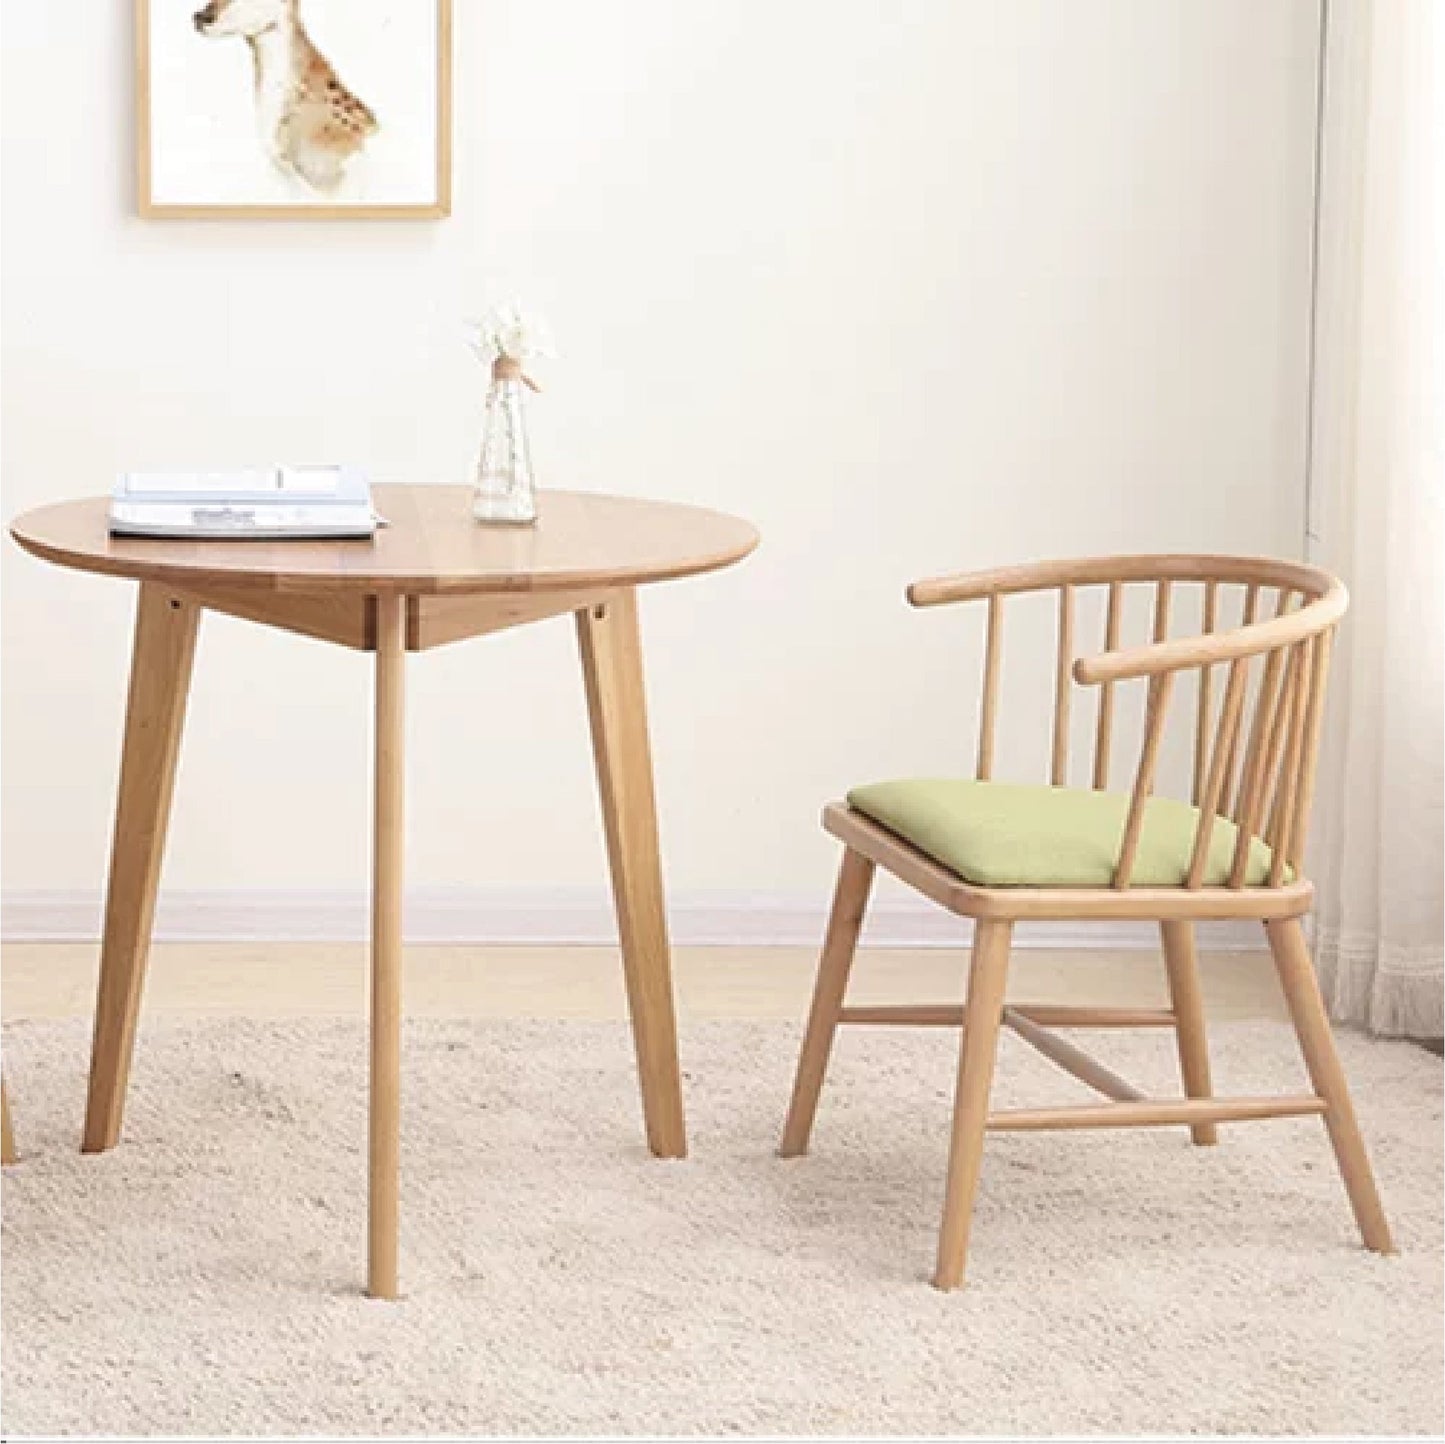 Combi solid wood dining chair (set of two)